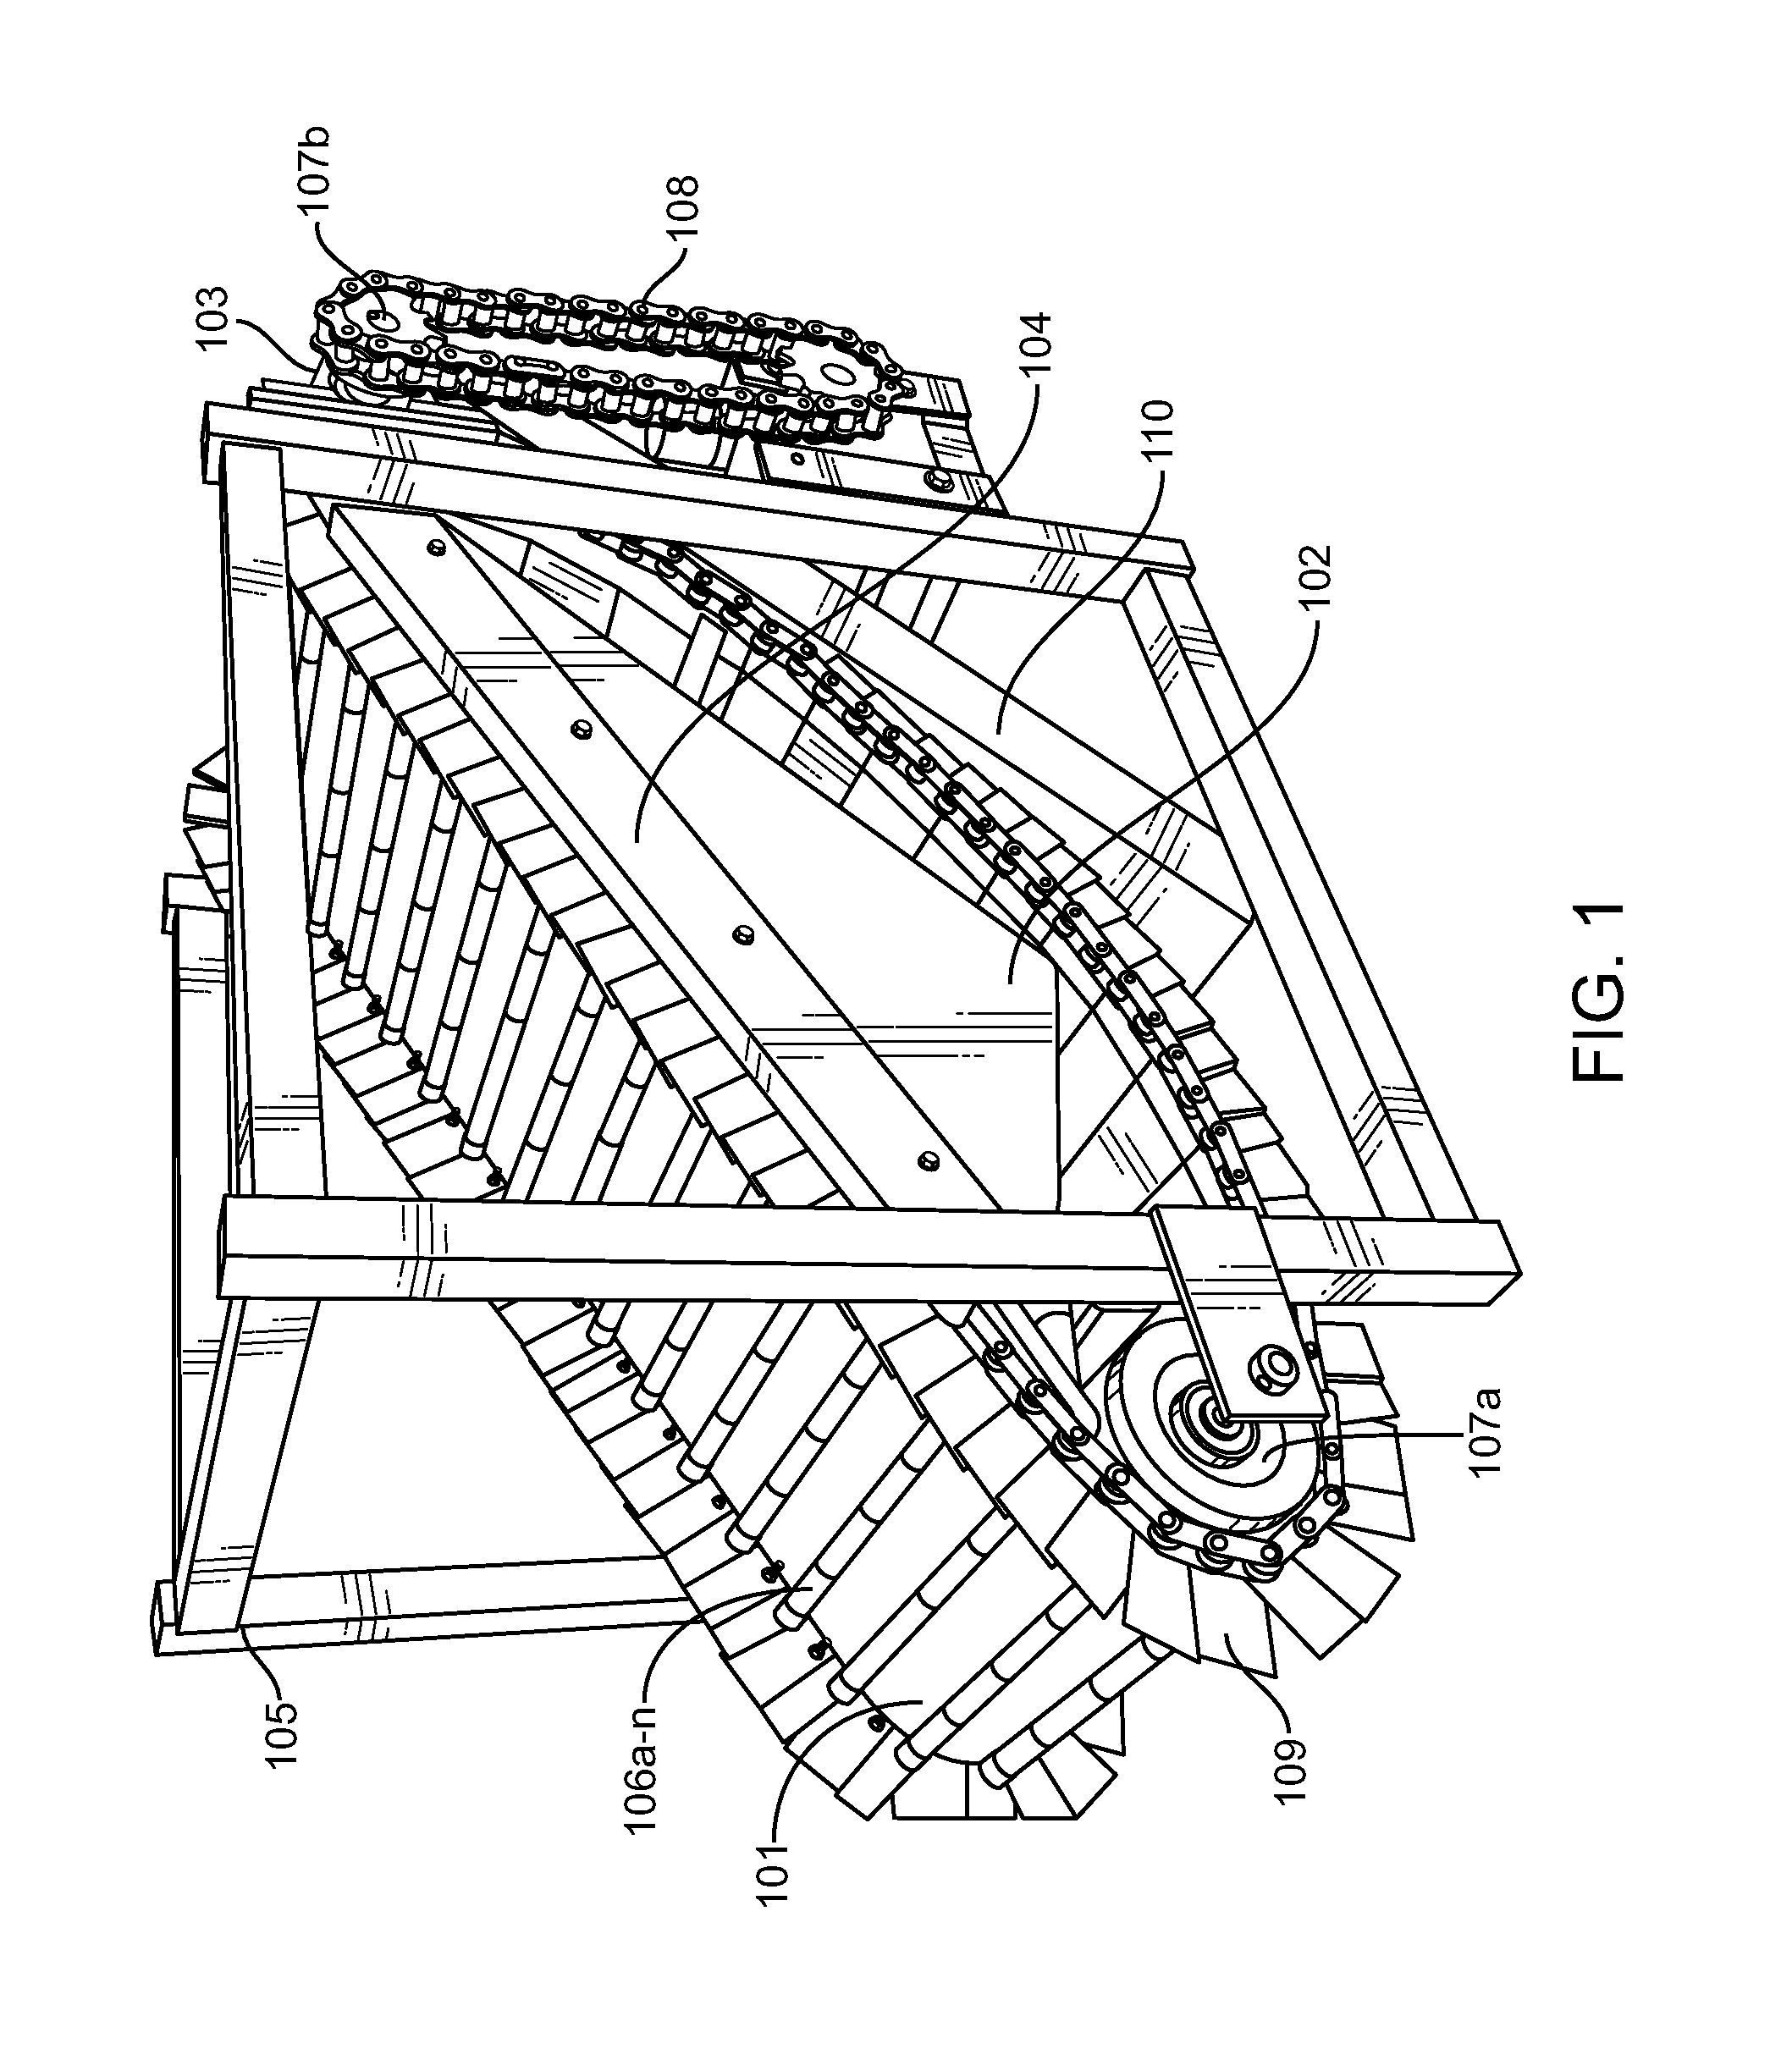 Systems and methods for the environmental remediation of materials contaminated with heavy minerals